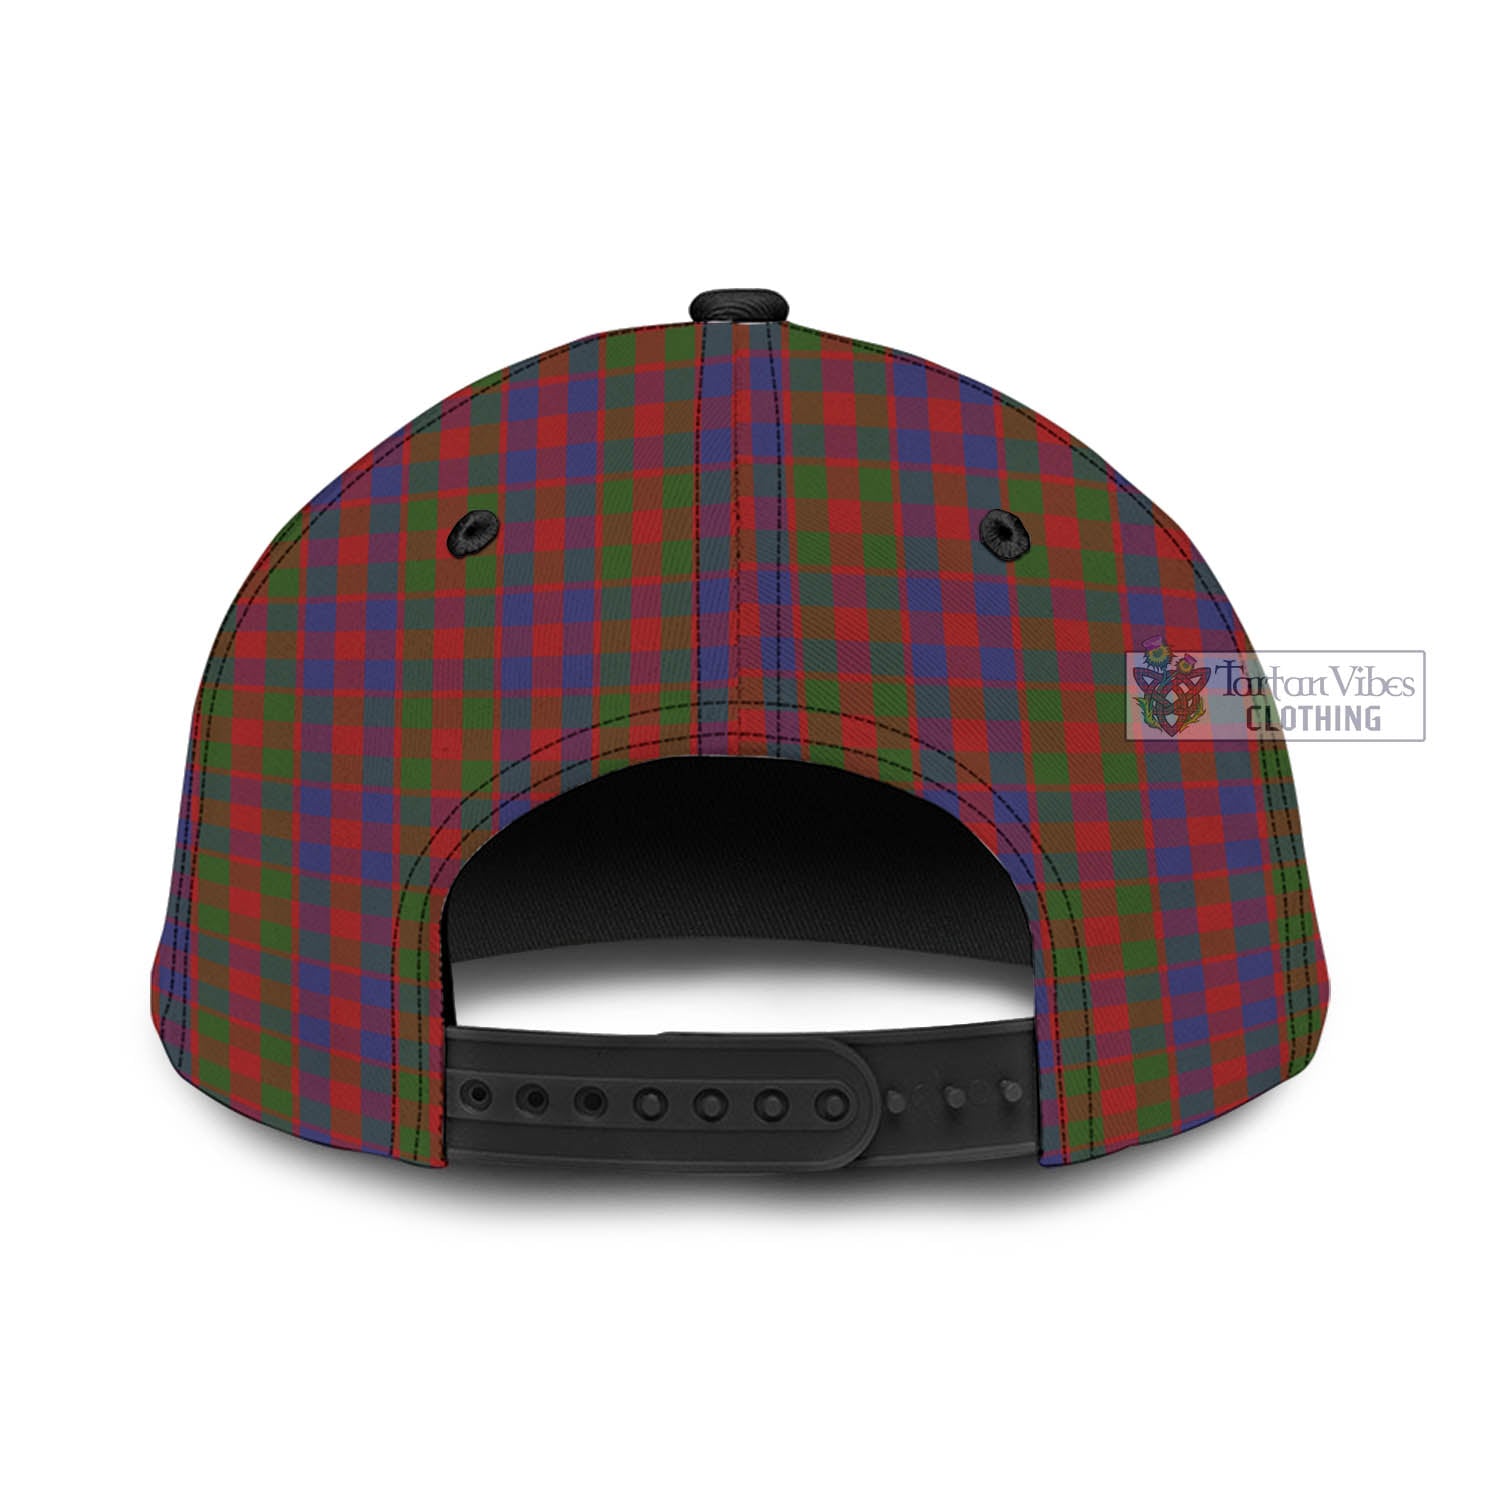 Tartan Vibes Clothing Gow Tartan Classic Cap with Family Crest In Me Style